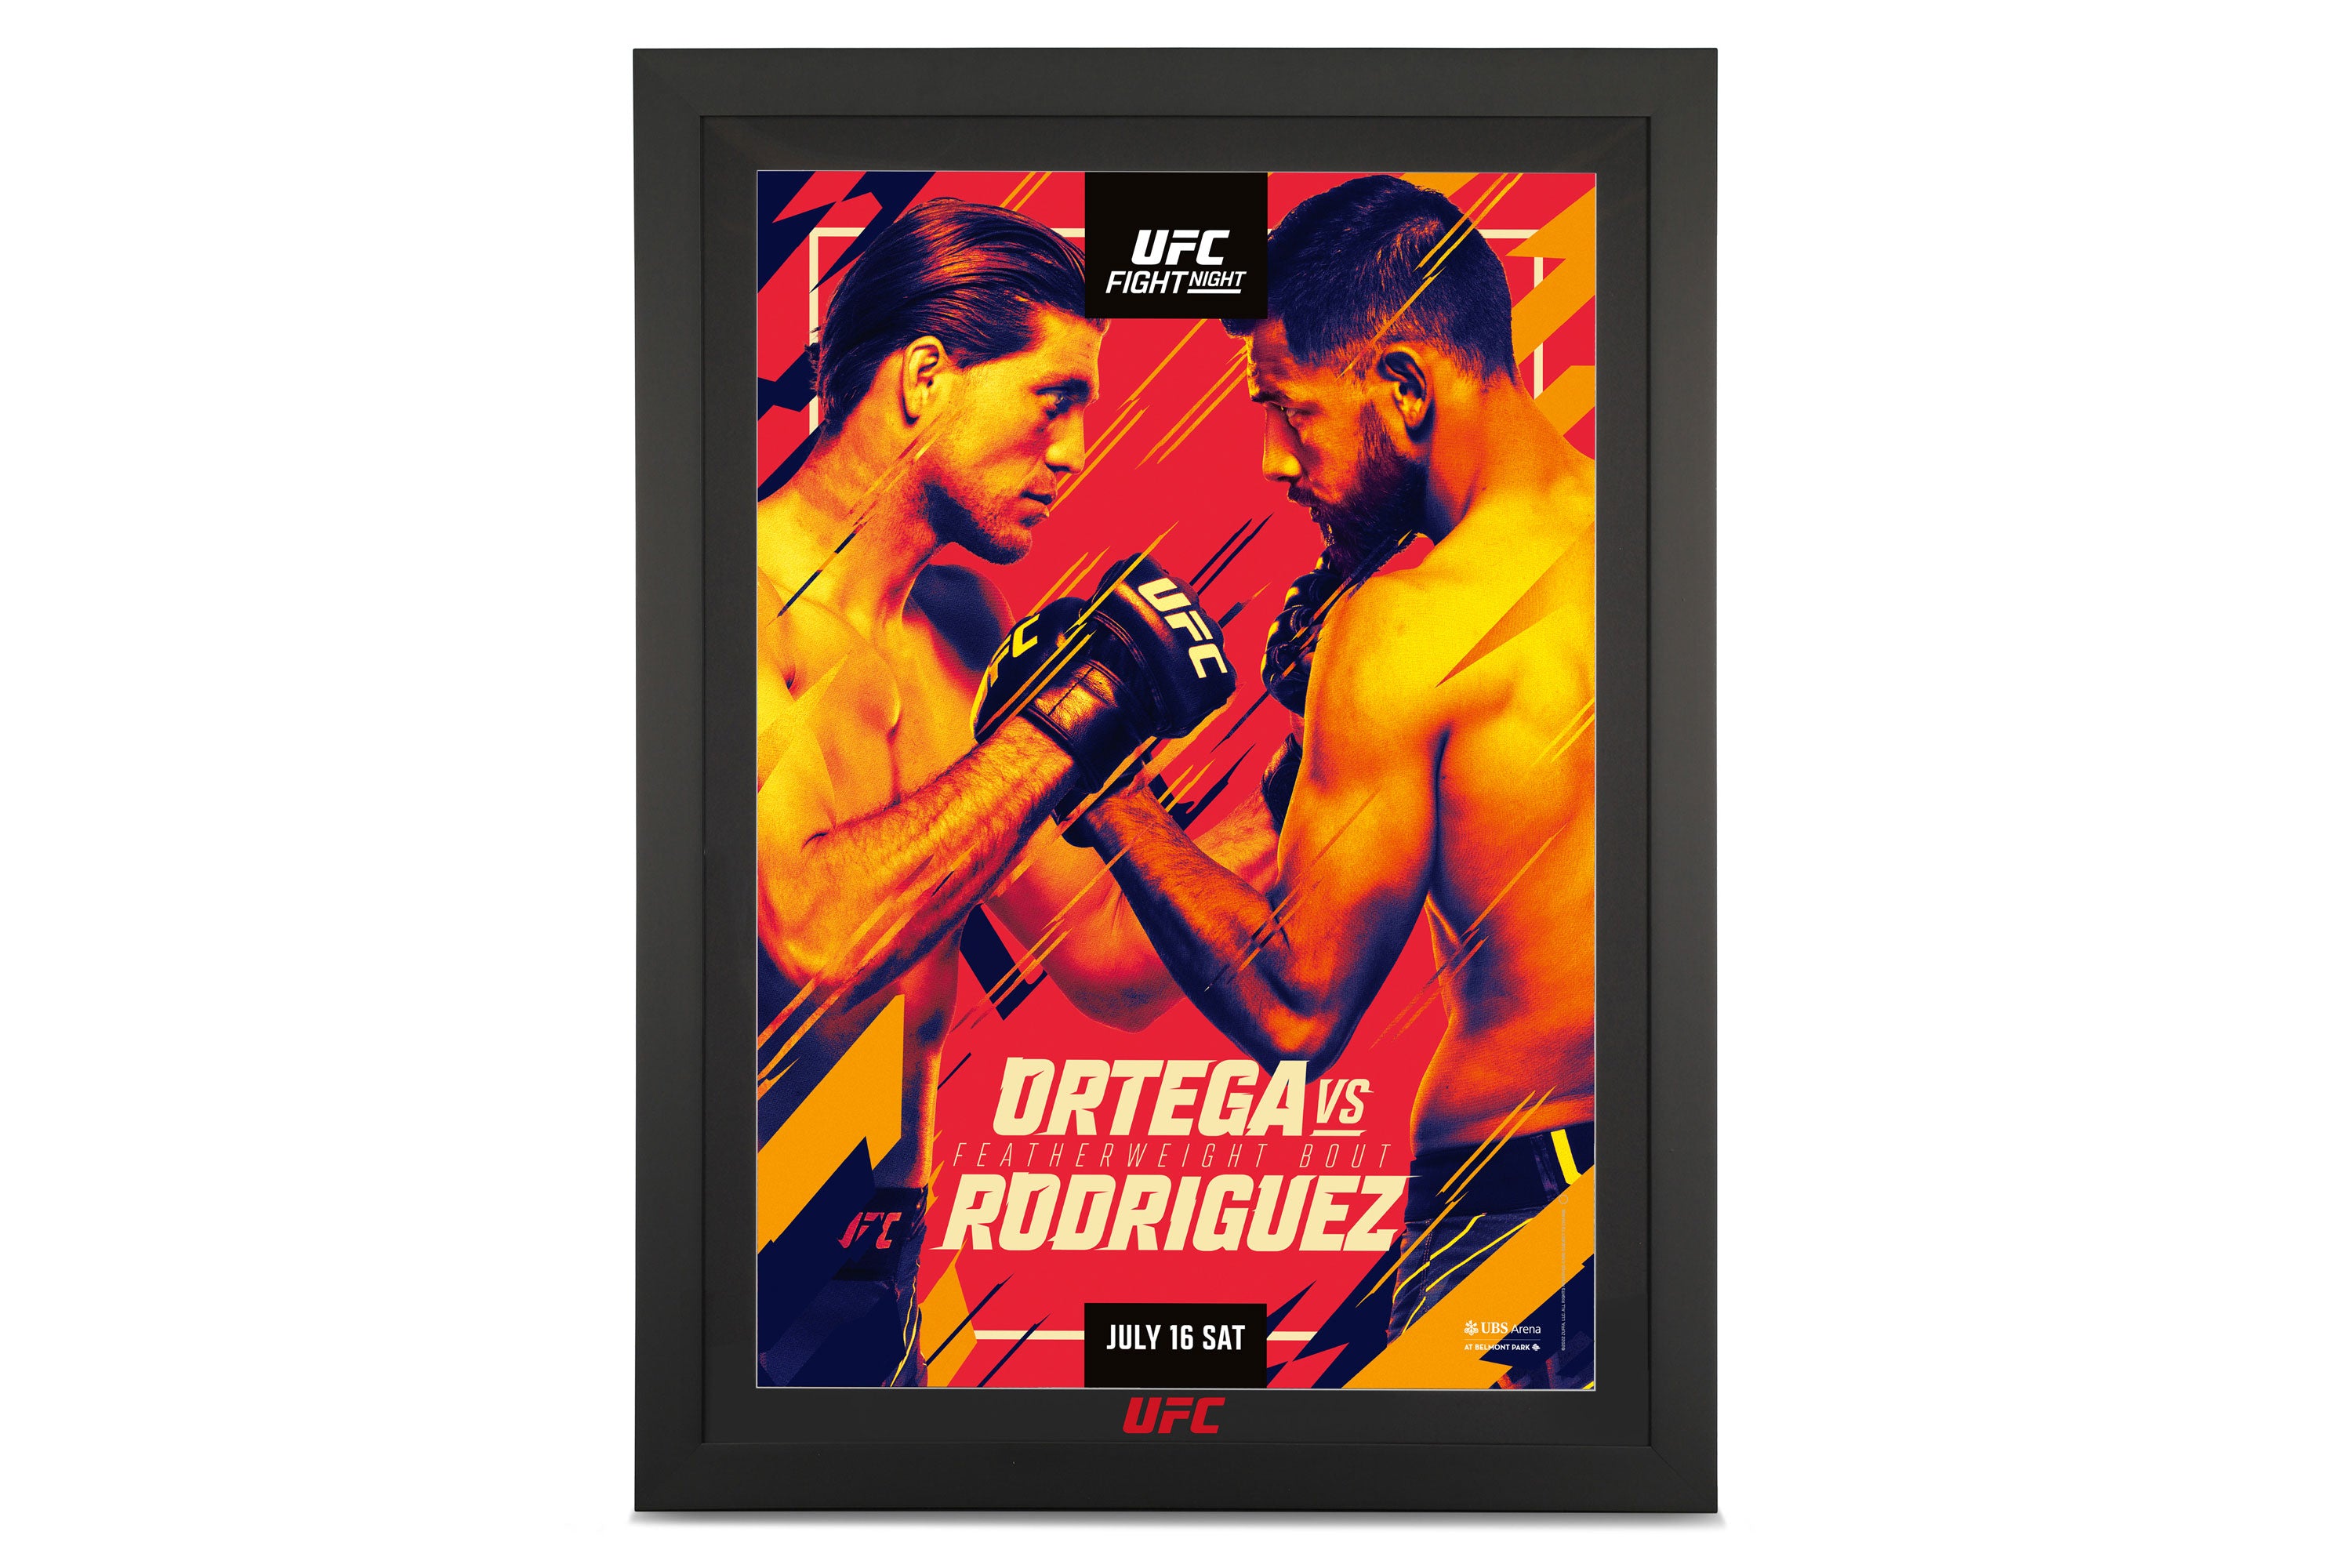 Event poster signed by Ortega & Rodriguez